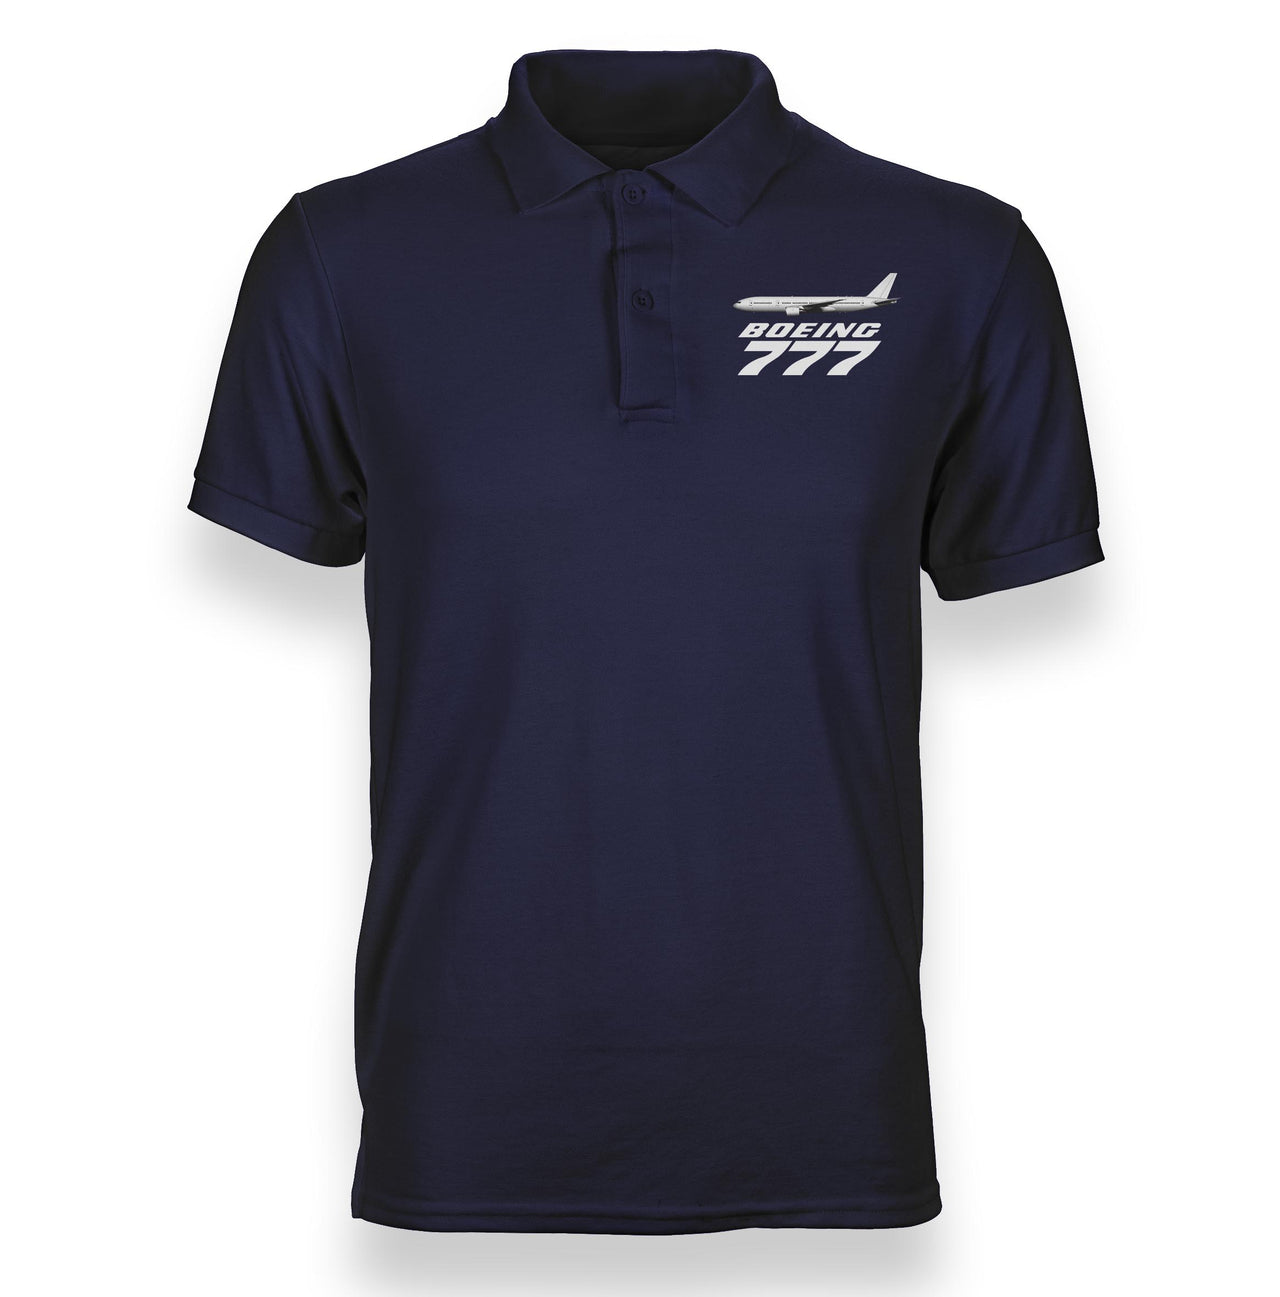 The Boeing 777 Designed Polo T-Shirts